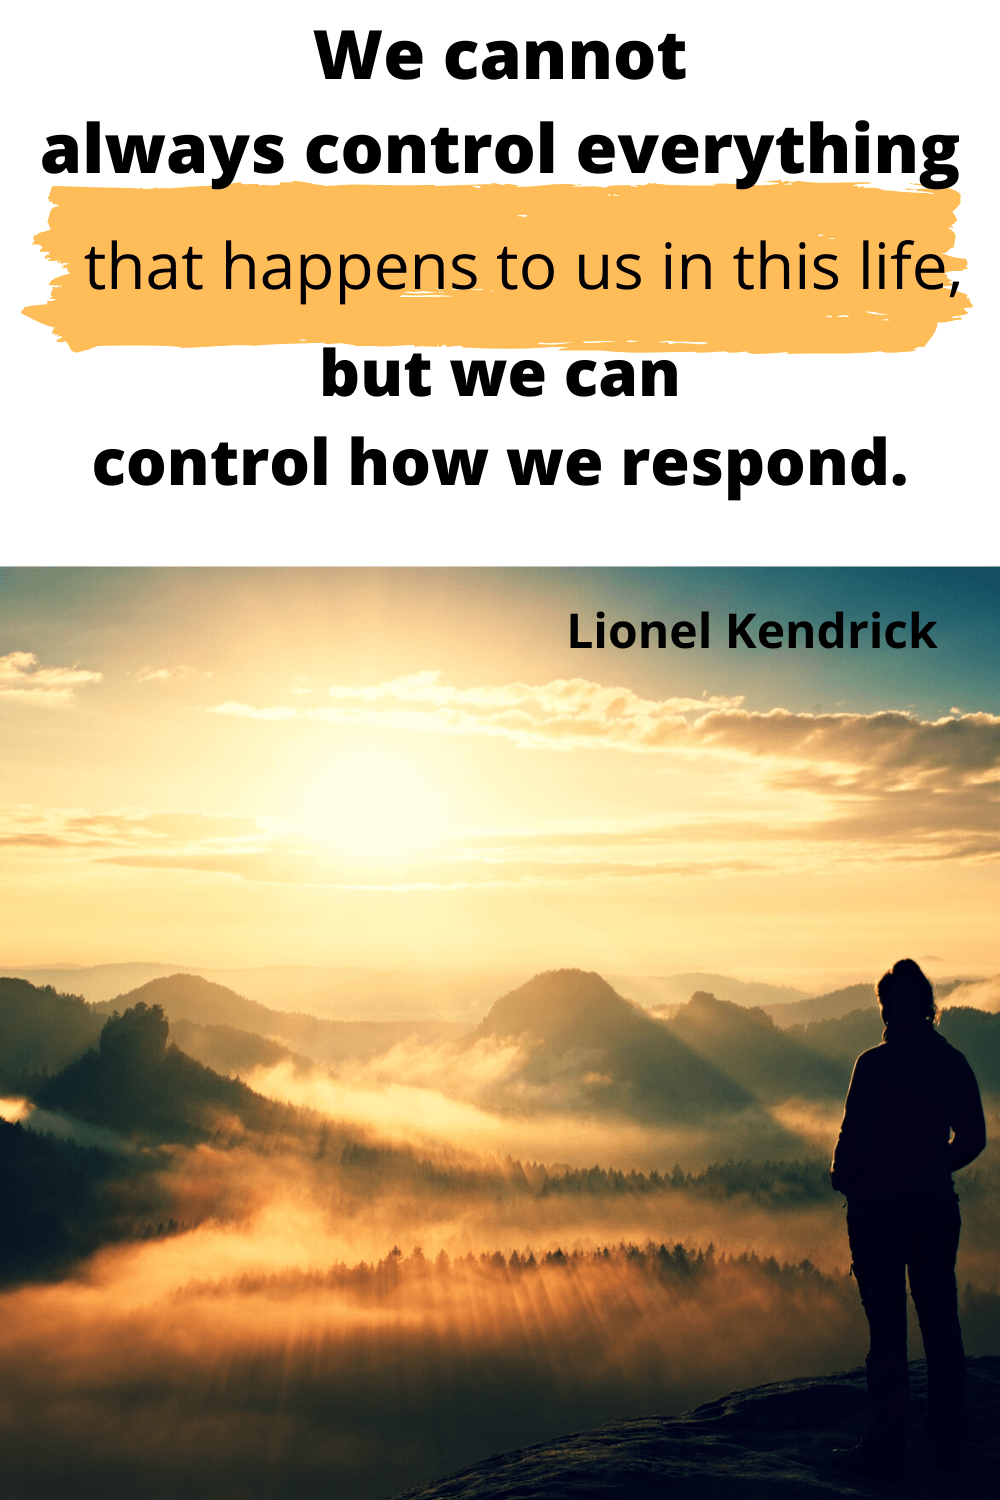 We cannot always control everything